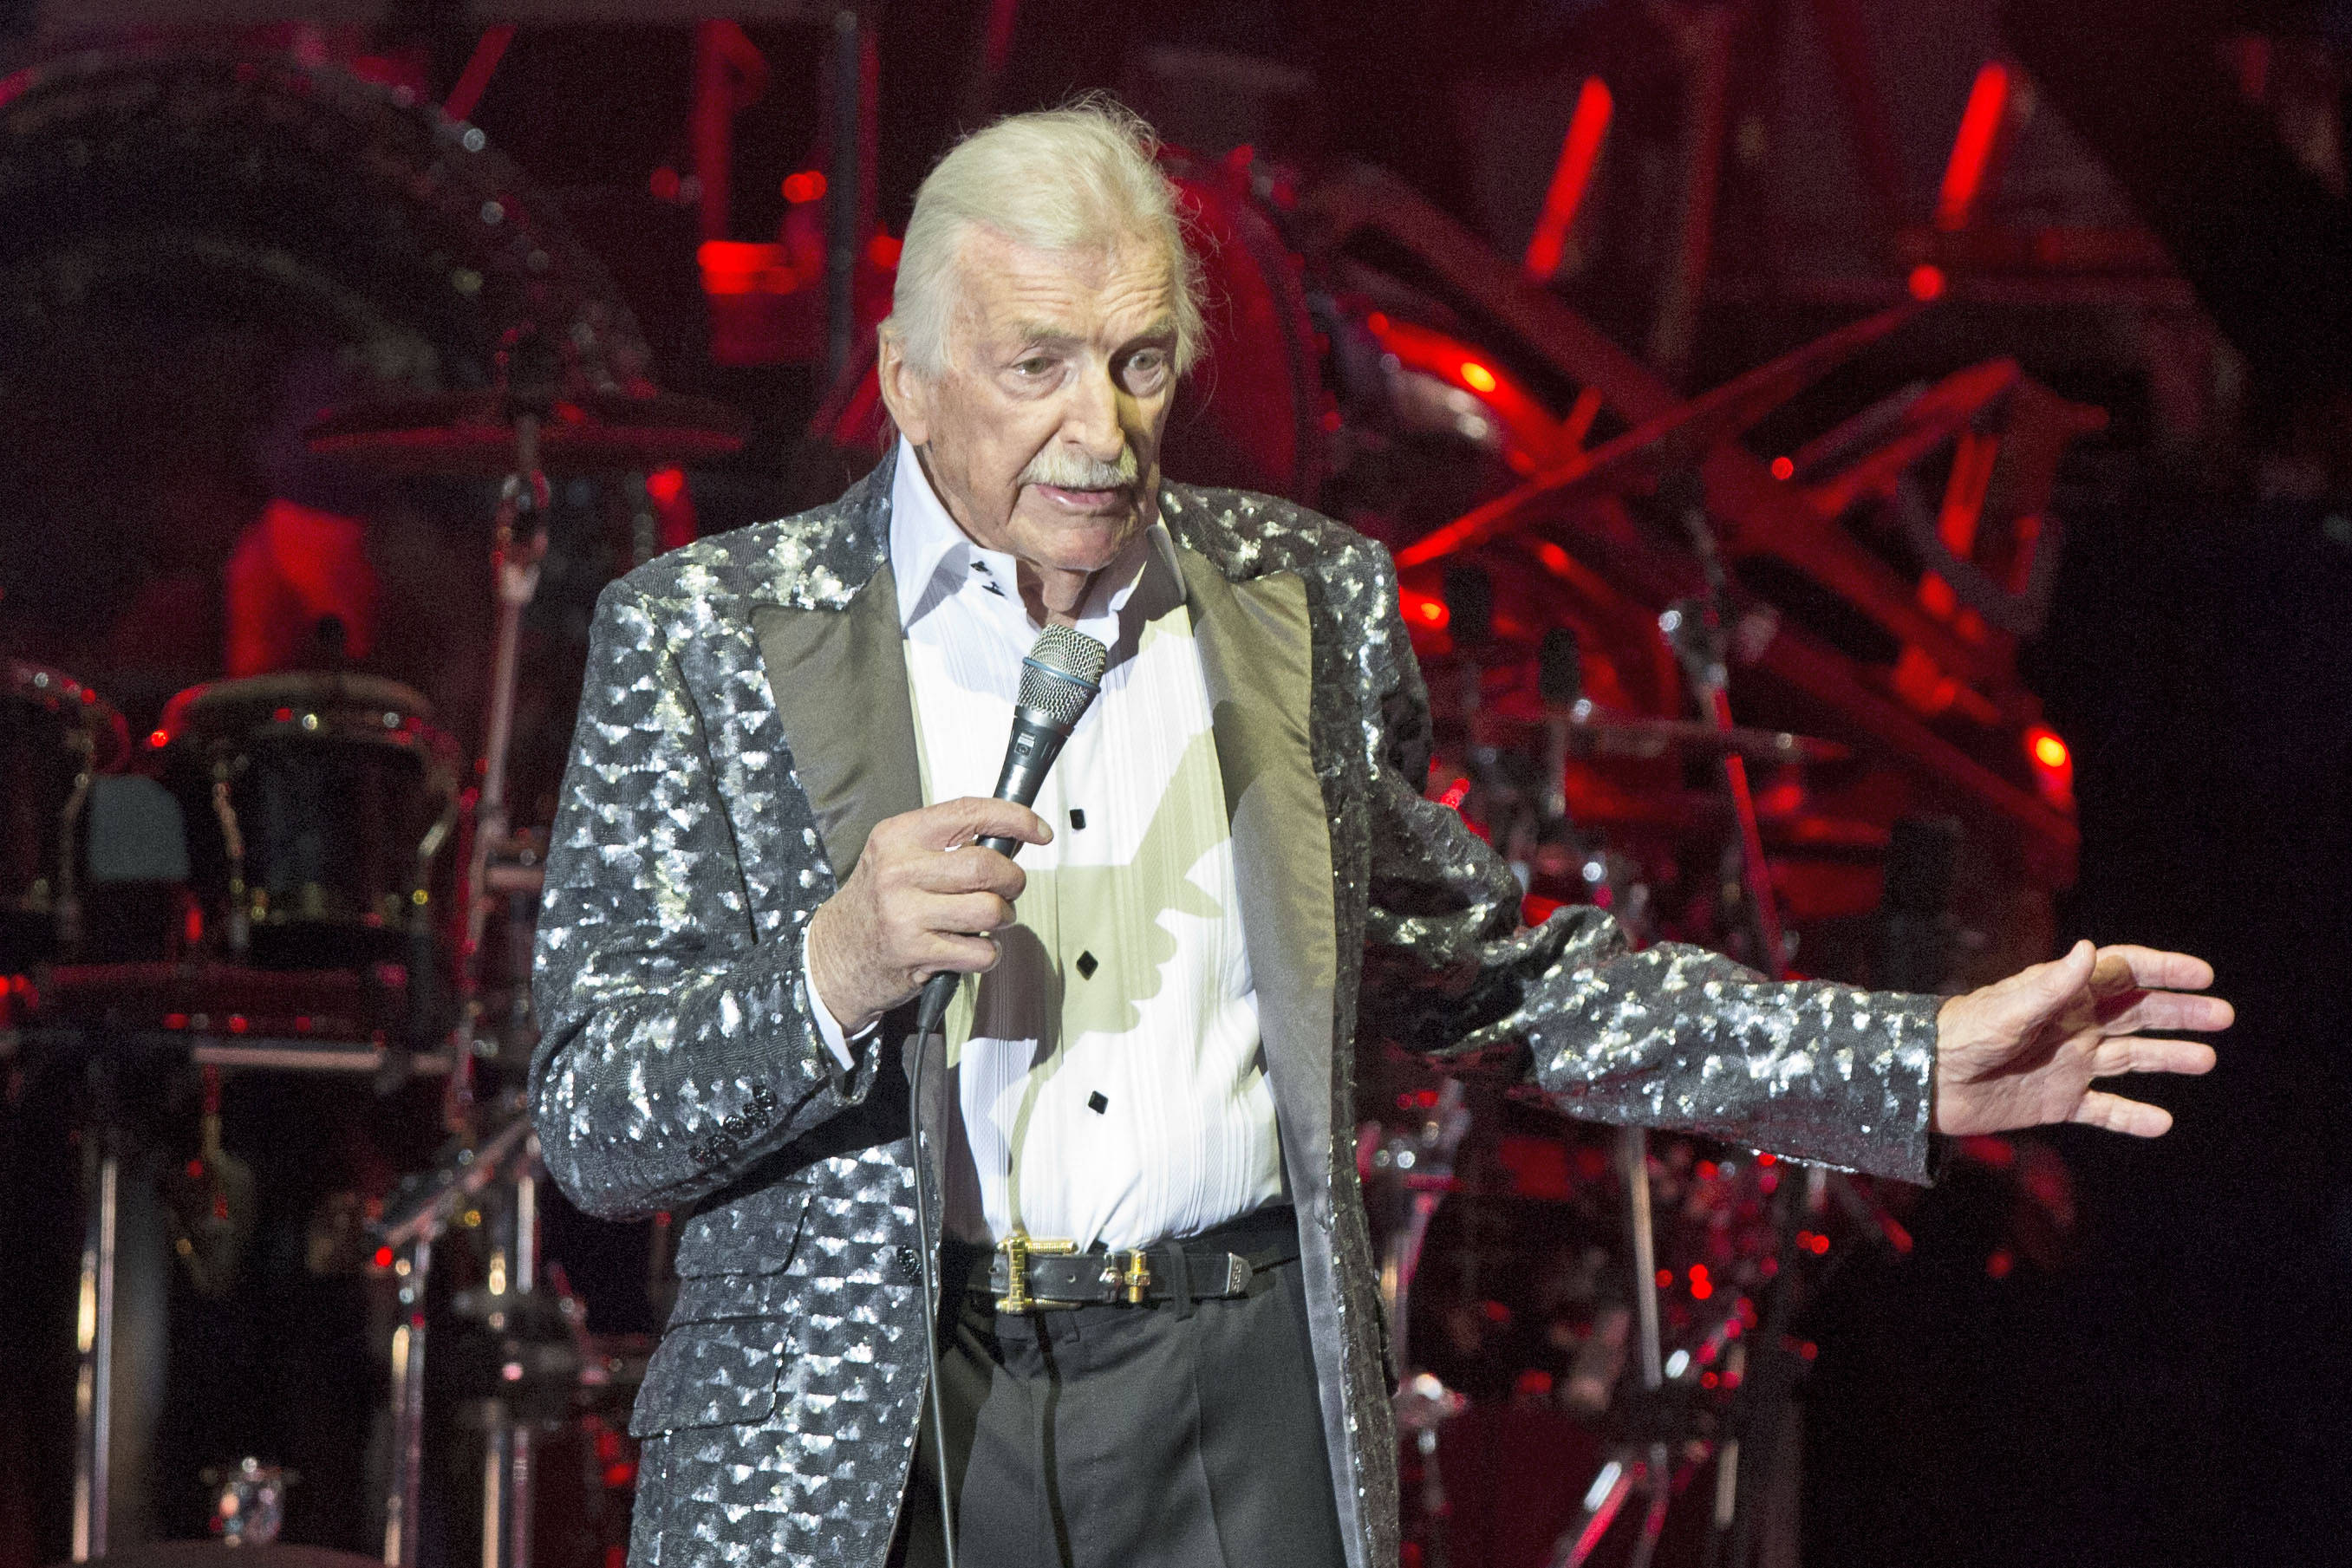 German bandleader and composer James Last performs live during a concert at the O2 World on April 18, 2015 in Berlin, Germany. (Frank Hoensch—Redferns/Getty Images)